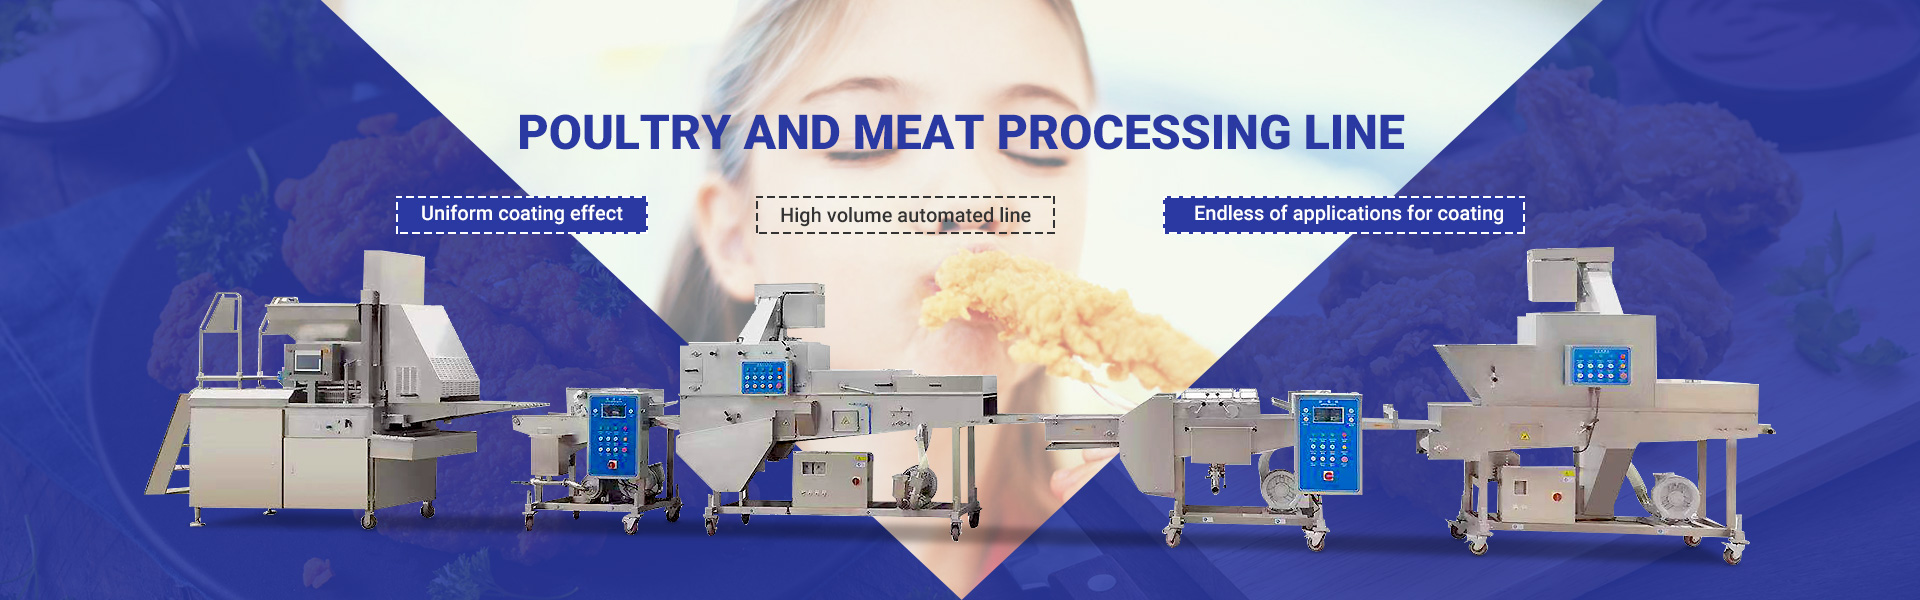 poultry and meat processing line